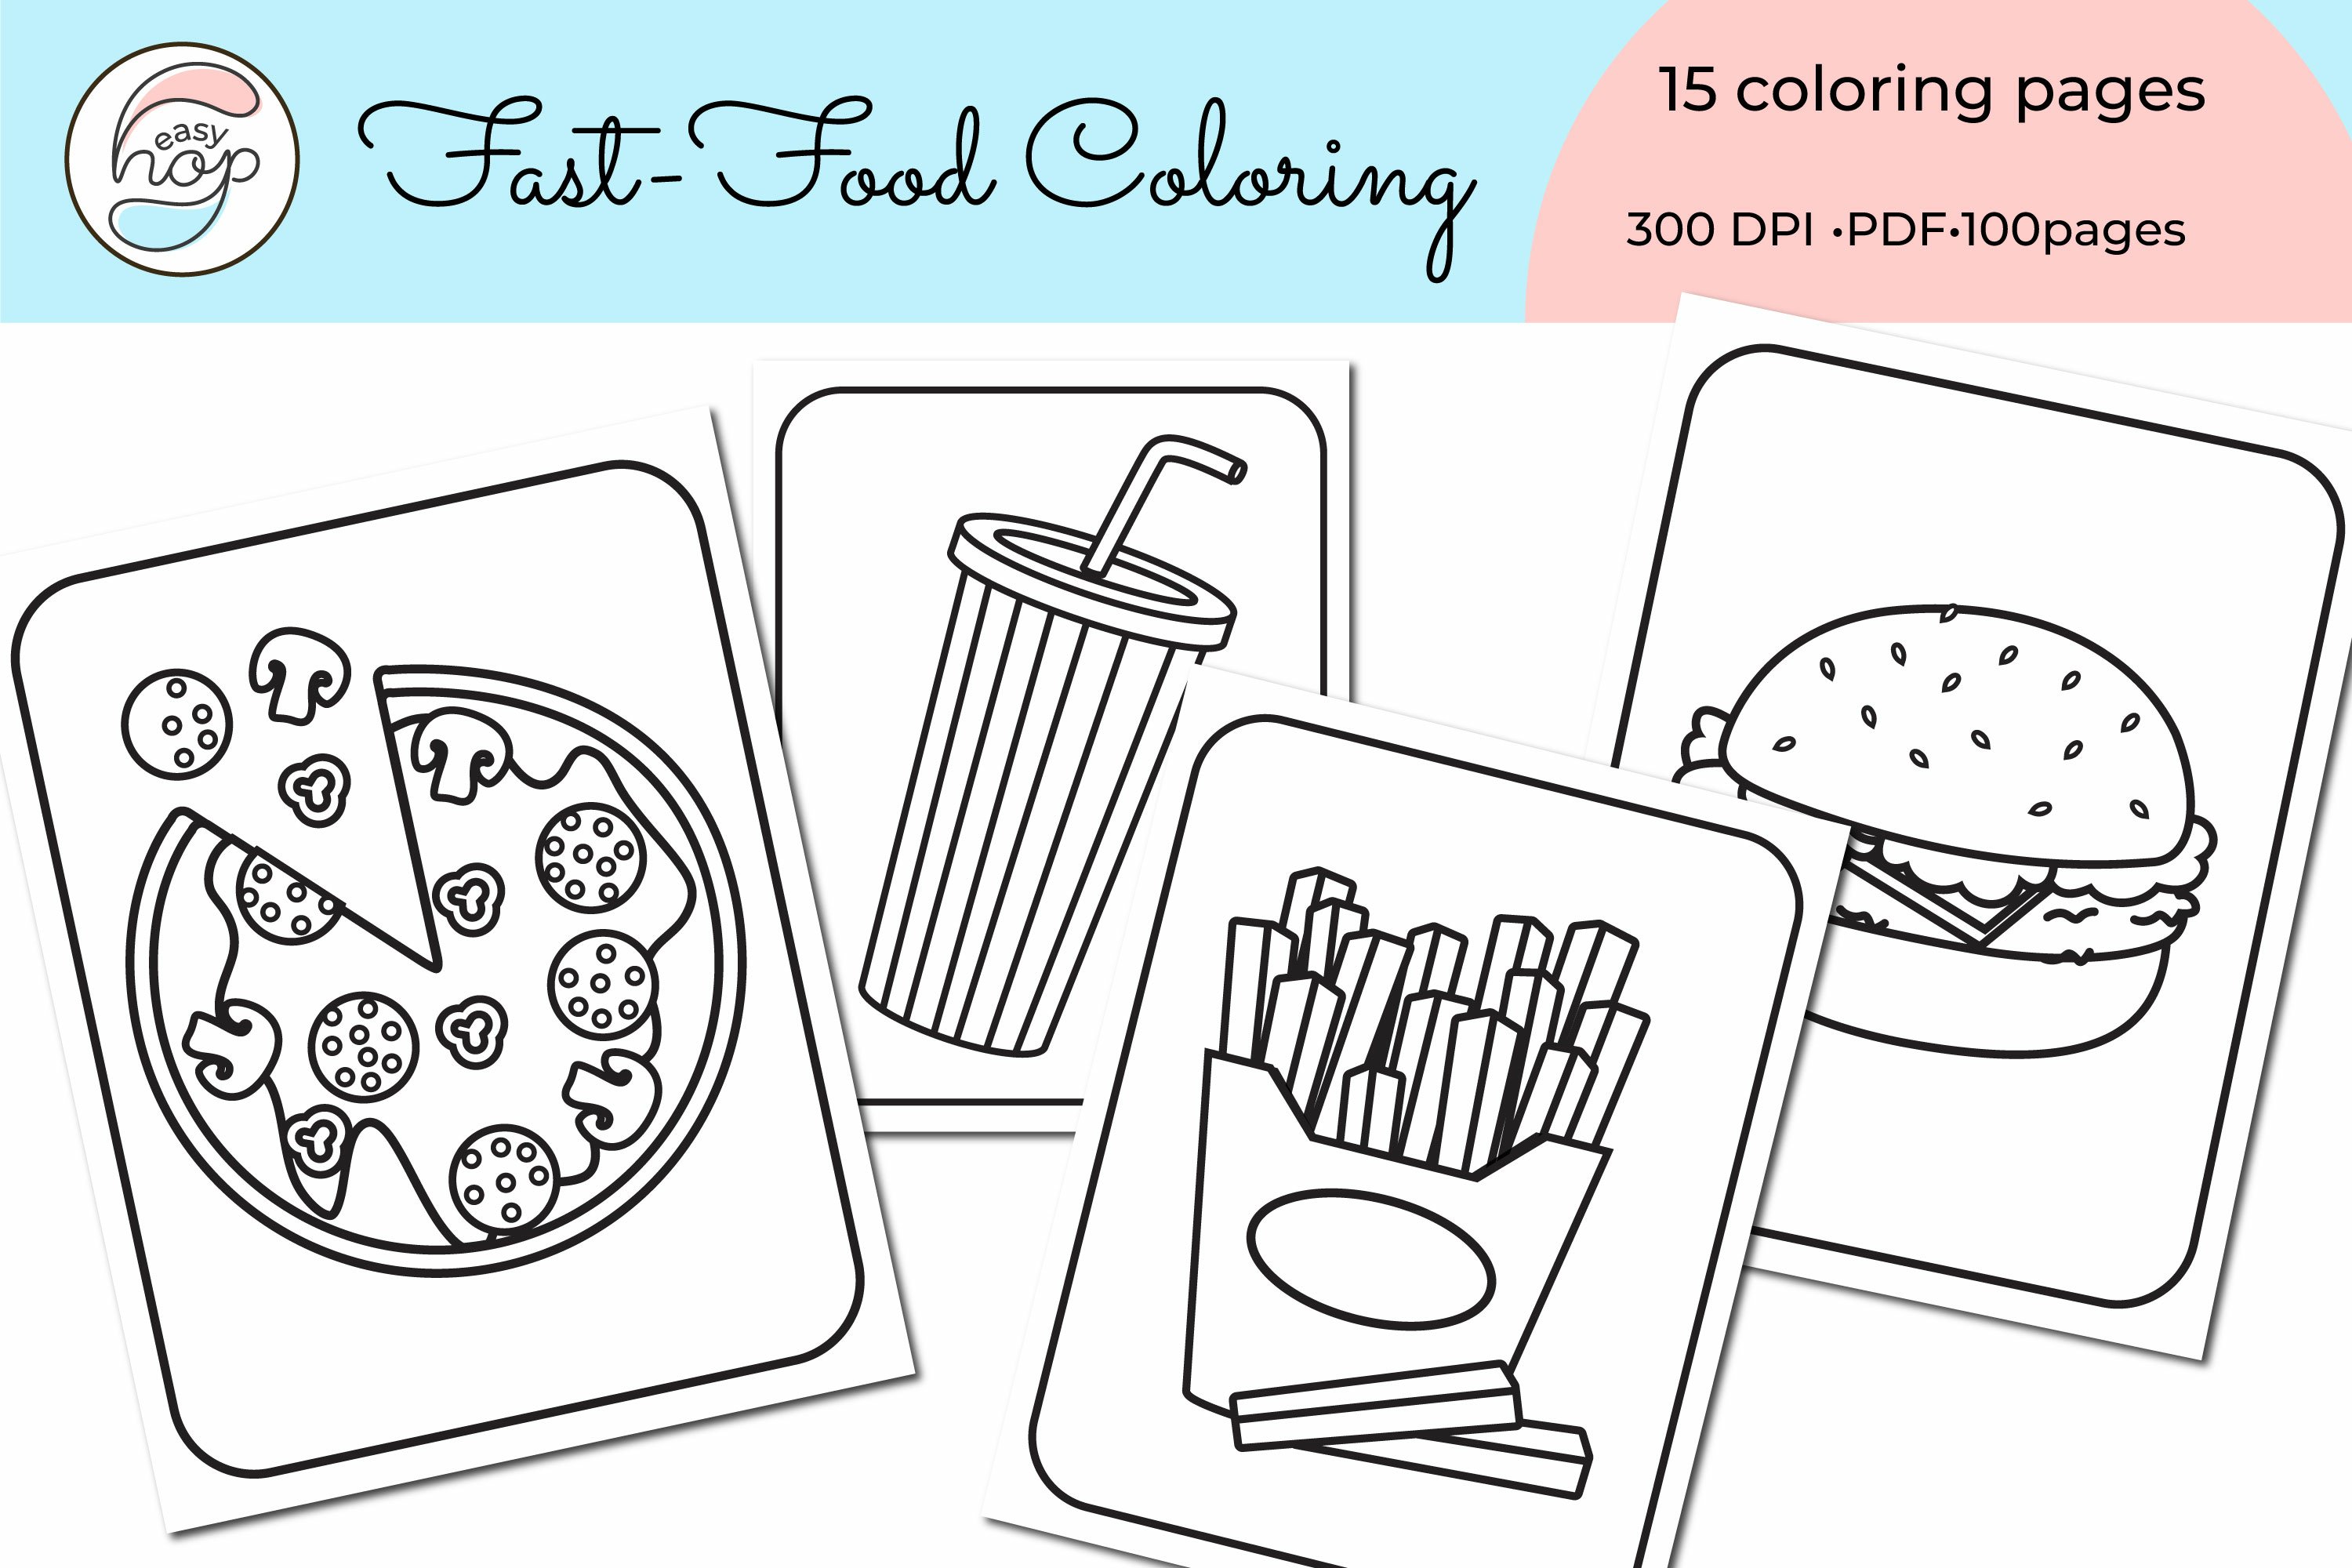 Fast food coloring pages set